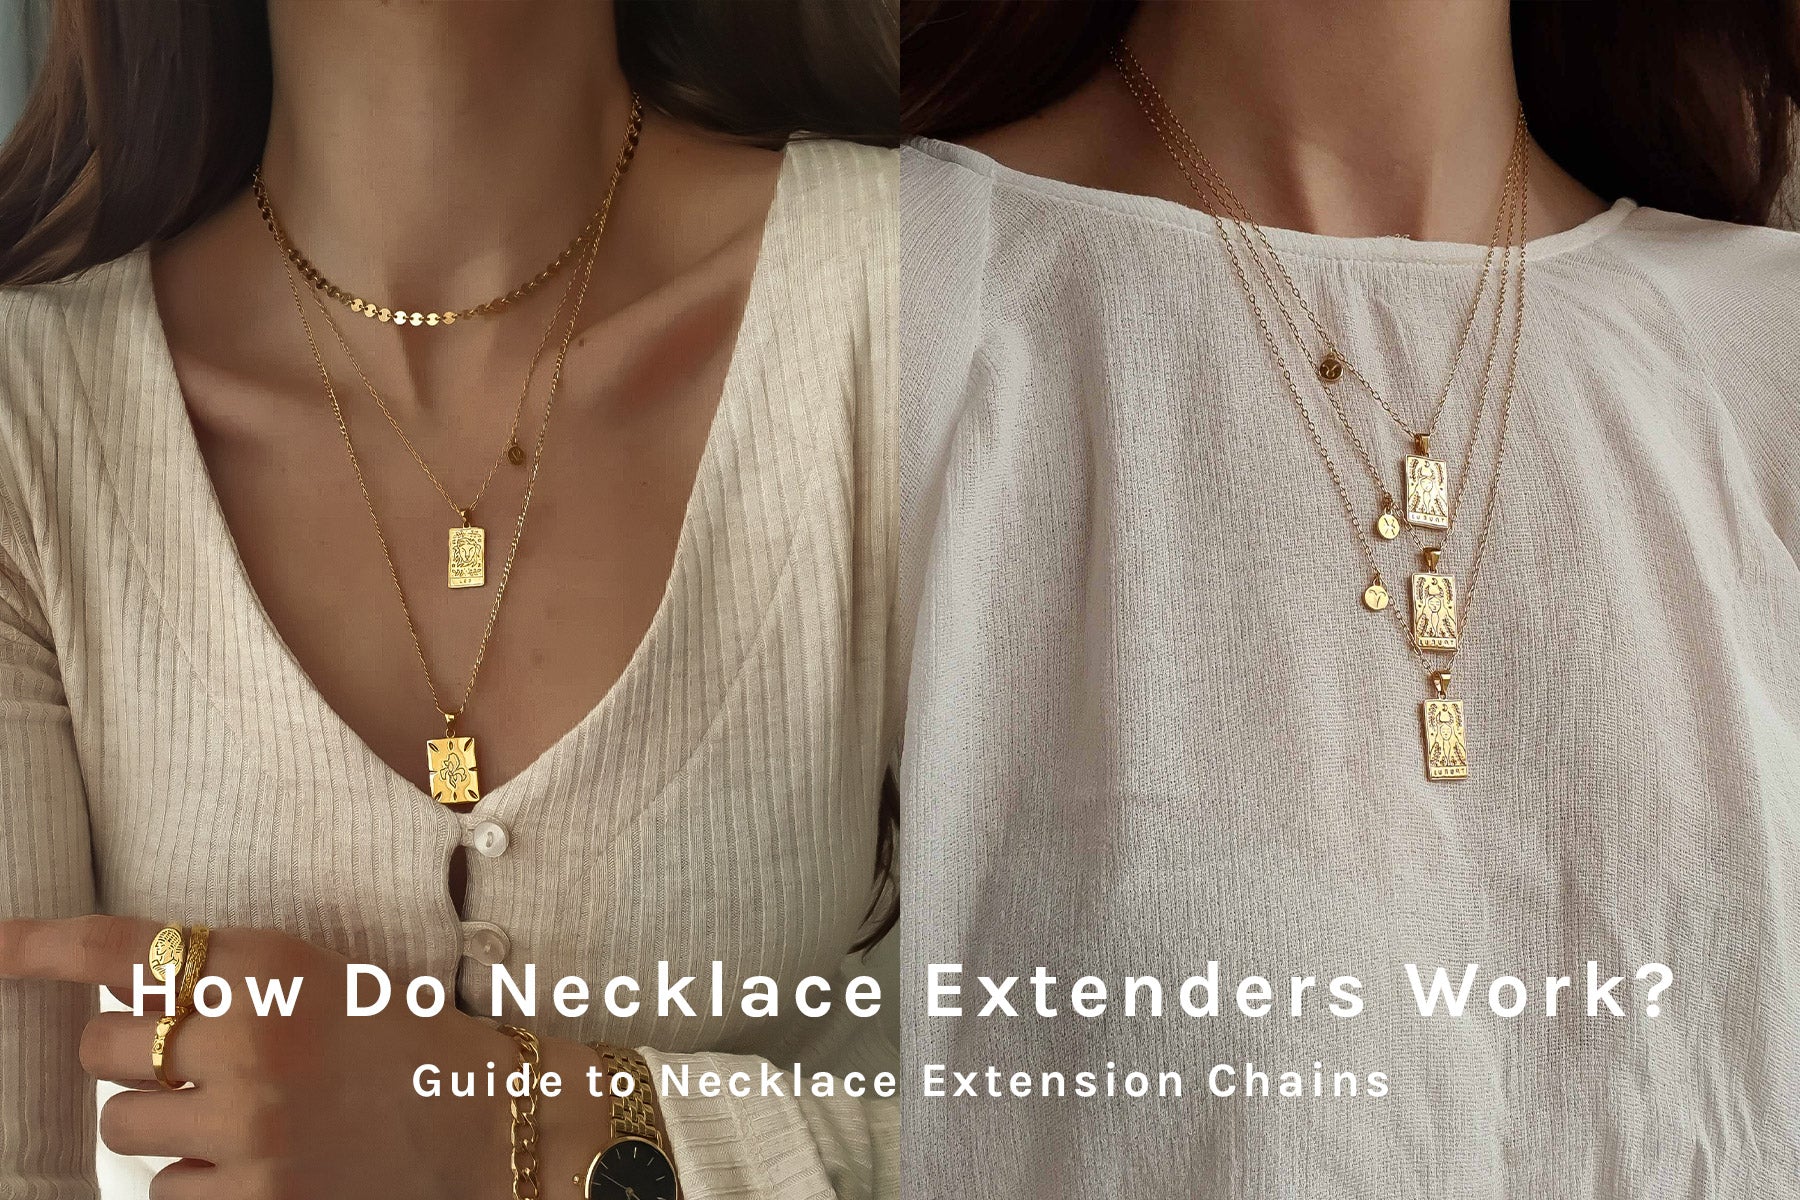 Gold Extend-A-Link  Necklace extender, Necklace, Chains jewelry